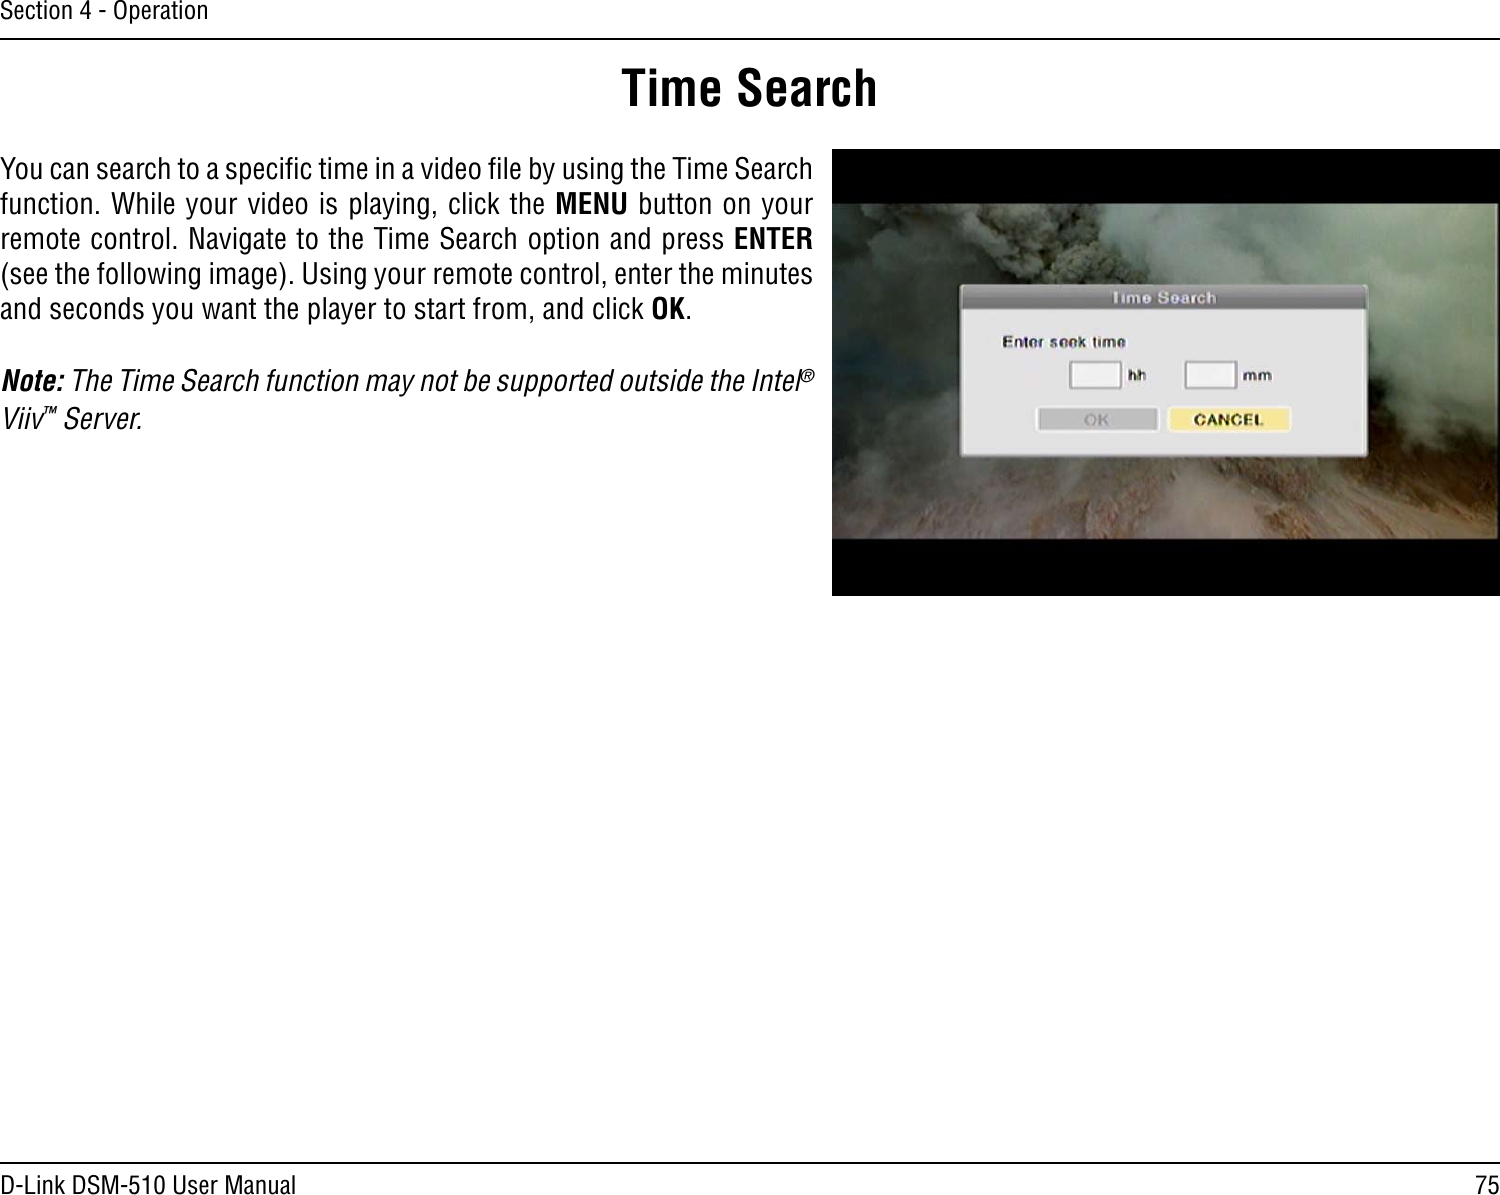 75D-Link DSM-510 User ManualSection 4 - OperationYou can search to a speciﬁc time in a video ﬁle by using the Time Search function. While your video is playing, click the MENU button on your remote control. Navigate to the Time Search option and press ENTER (see the following image). Using your remote control, enter the minutes and seconds you want the player to start from, and click OK.Note: The Time Search function may not be supported outside the Intel® Viiv™ Server.Time Search